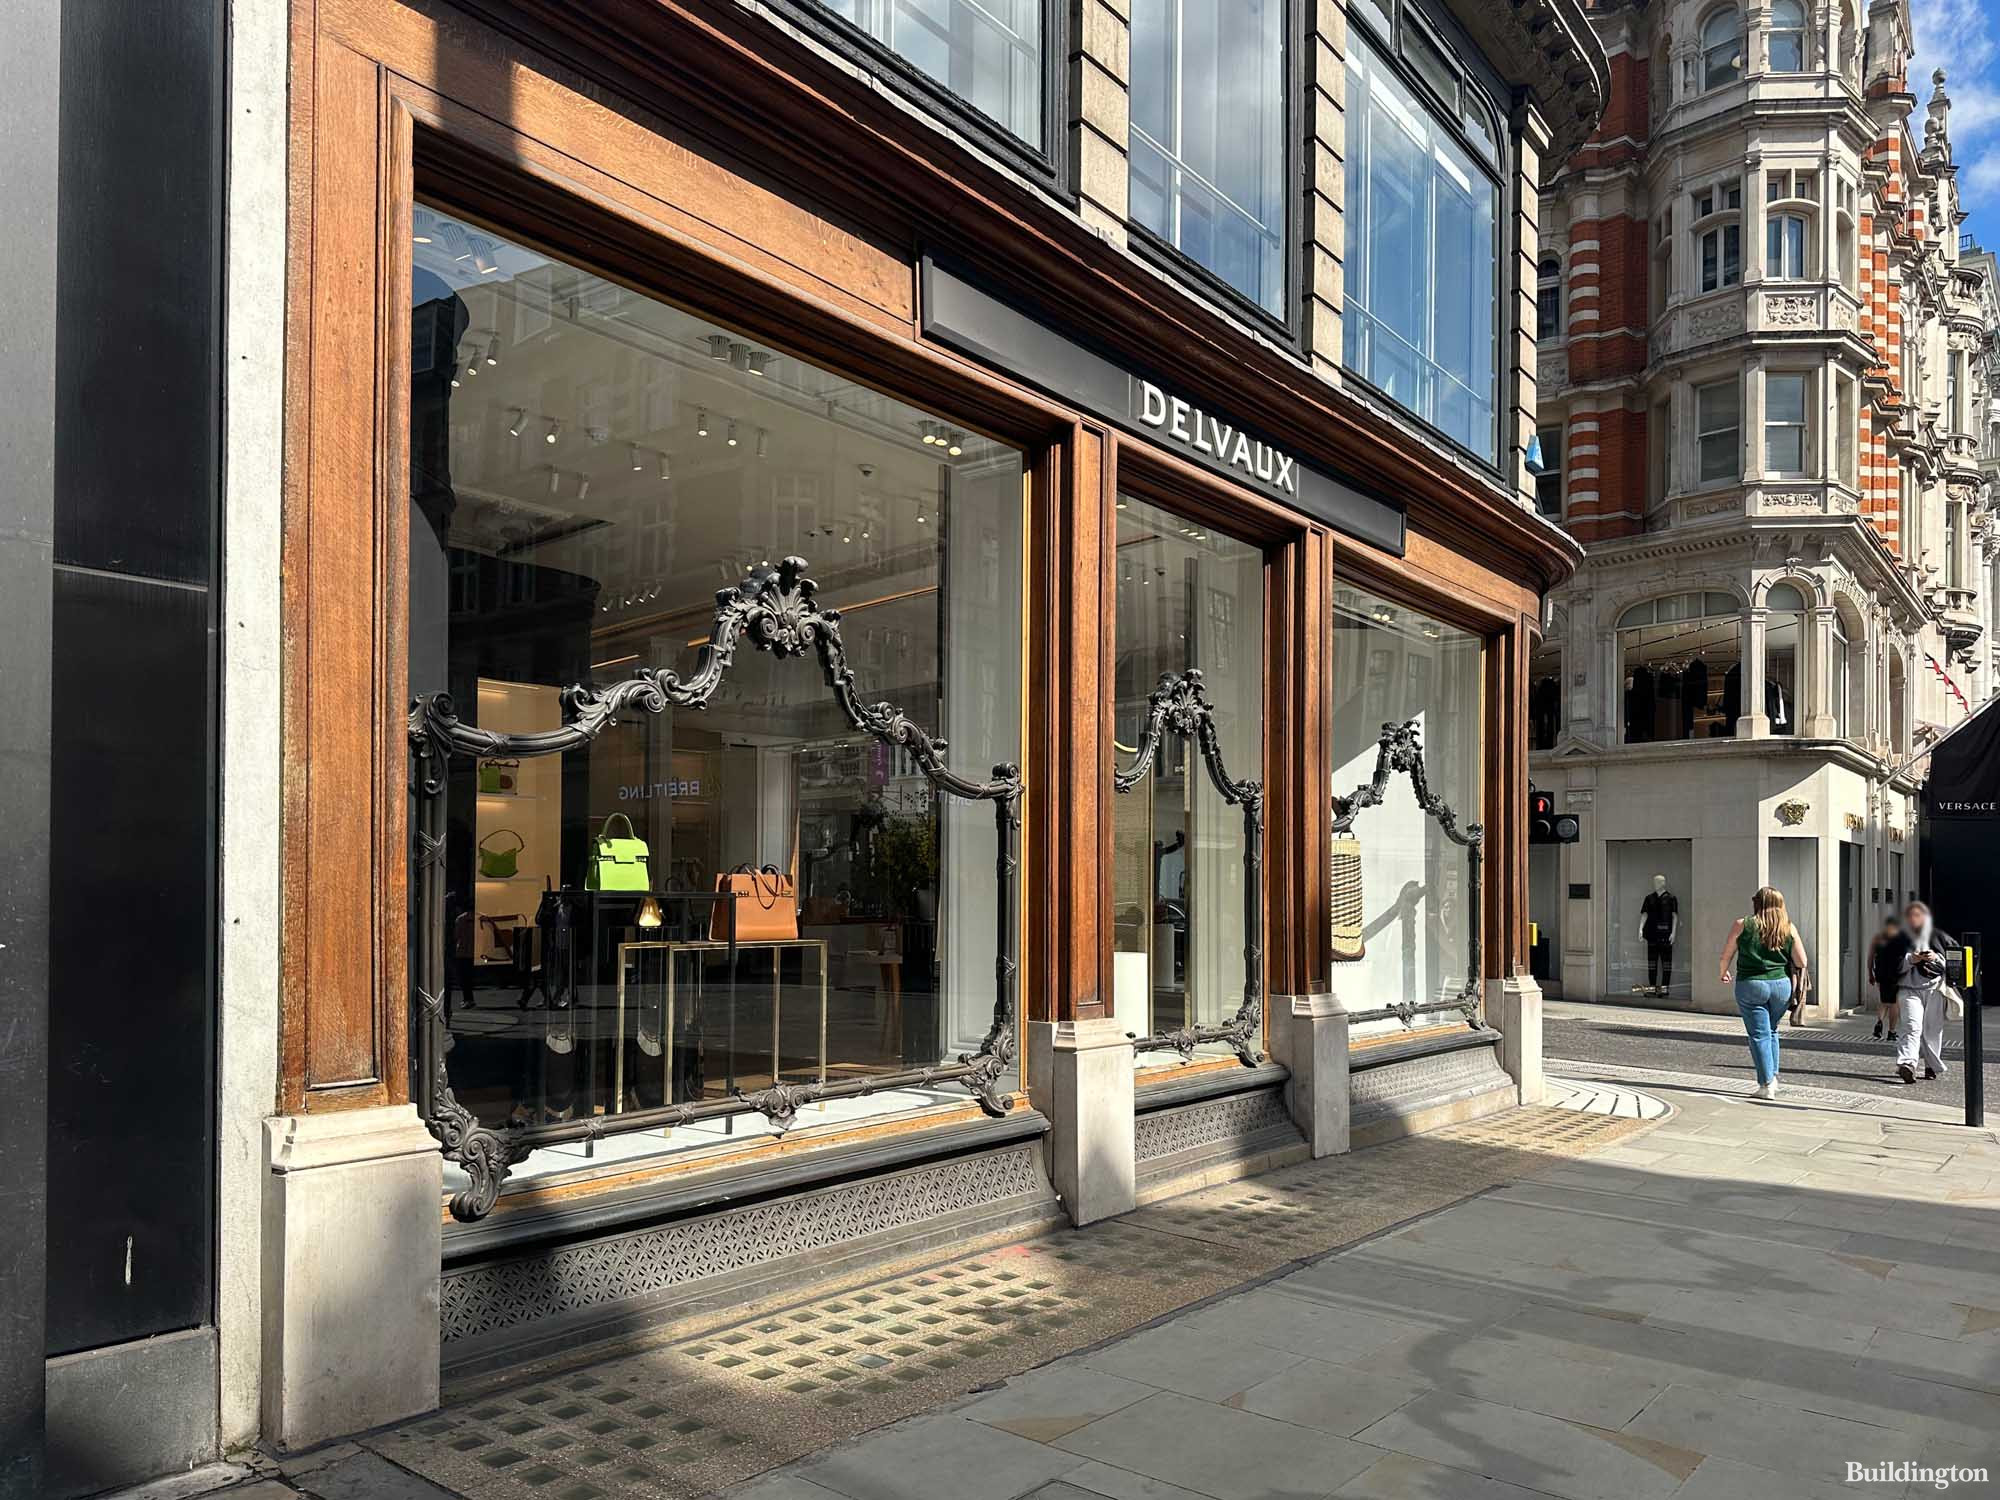 Delvaux store at 47-48 New Bond Street building in Mayfair, London W1